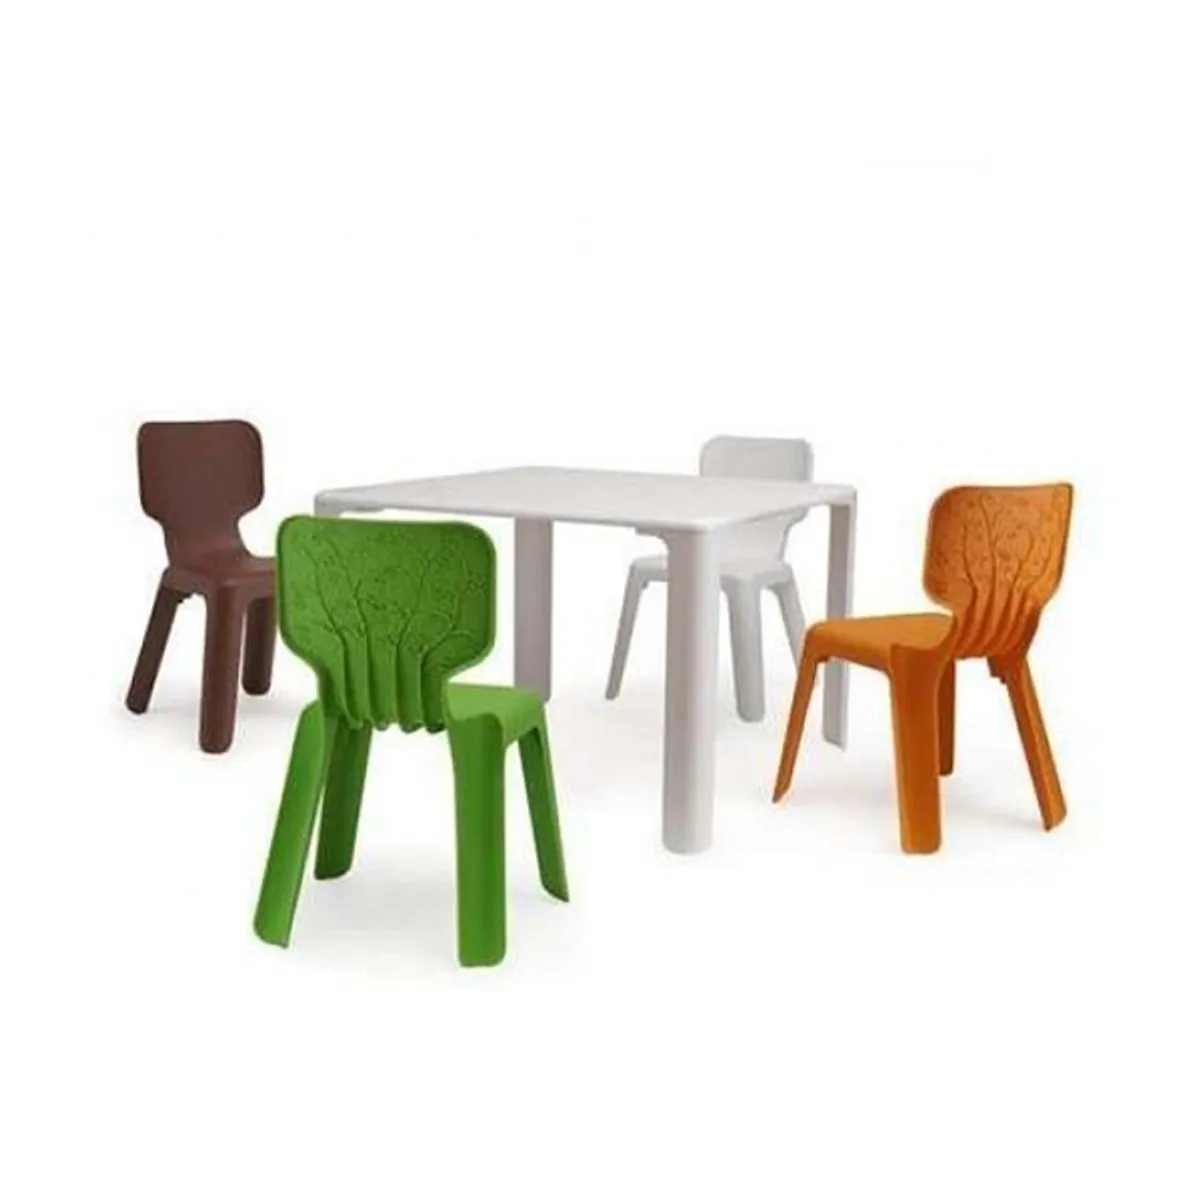 Alma Junior Childrens Chair Inside Out Contracts